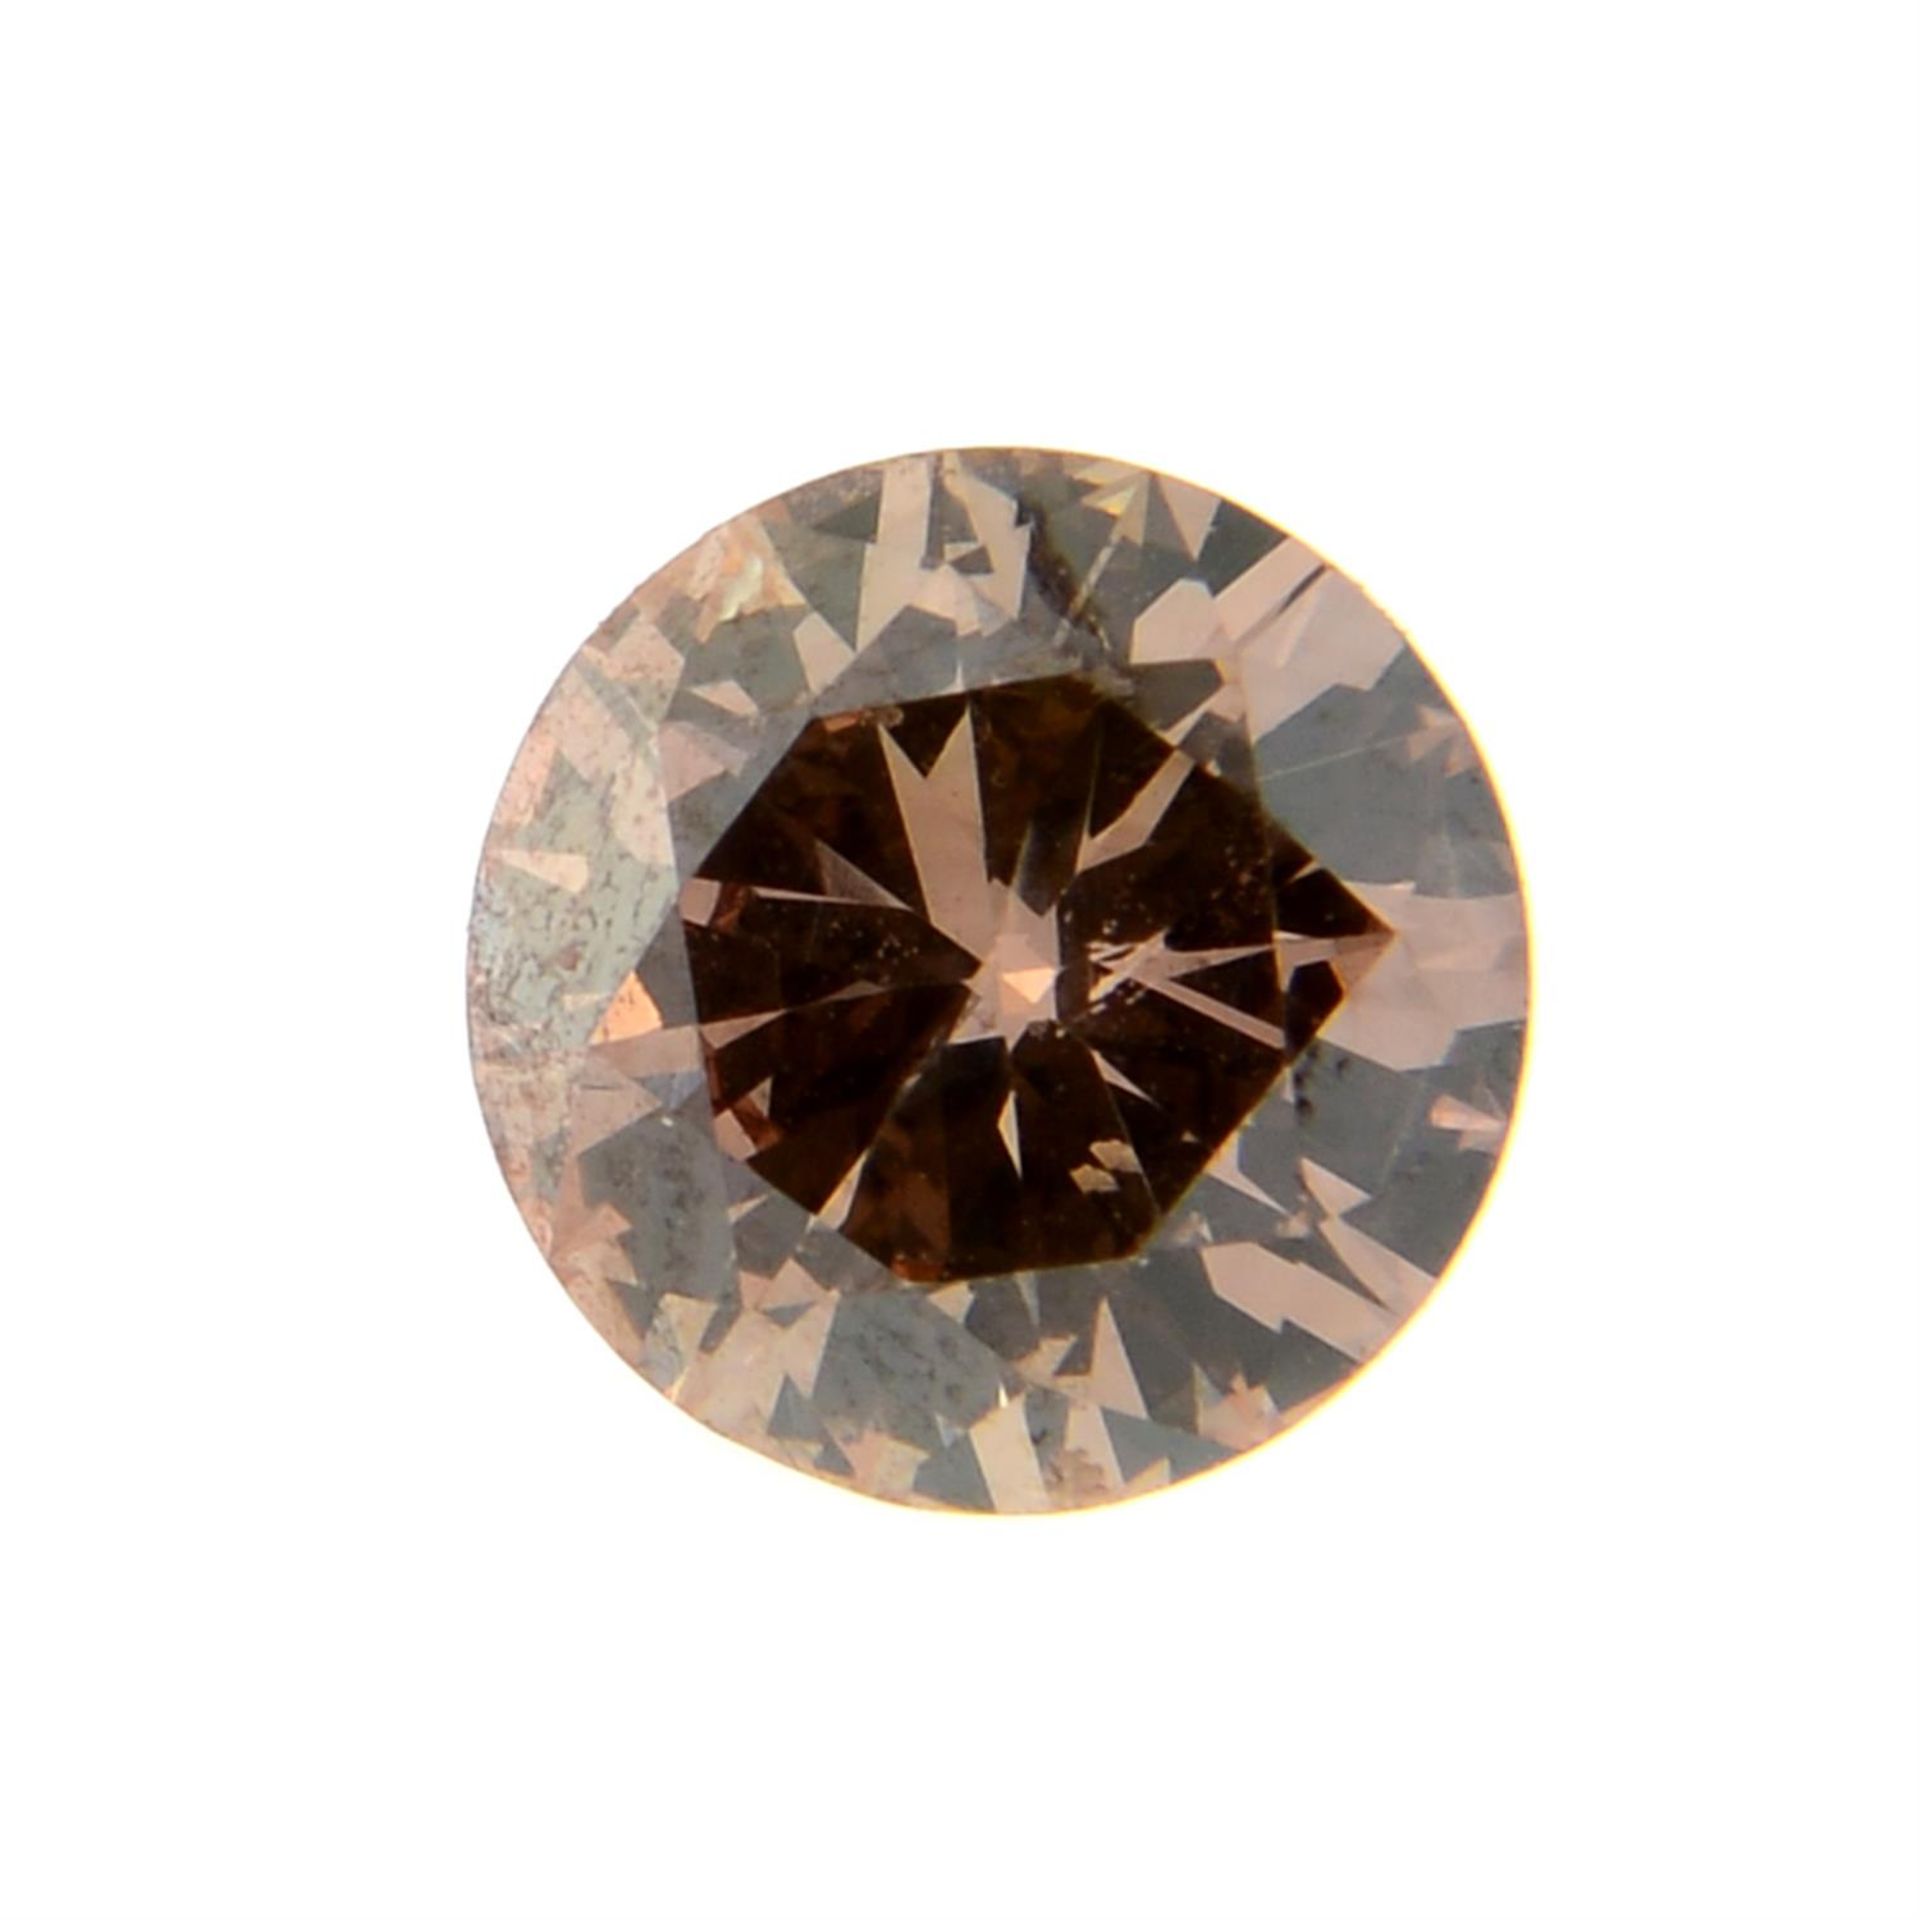 A brilliant cut 'brown' diamond, weighing 1ct. Estimated to be 'brown' colour and SI2 clarity.